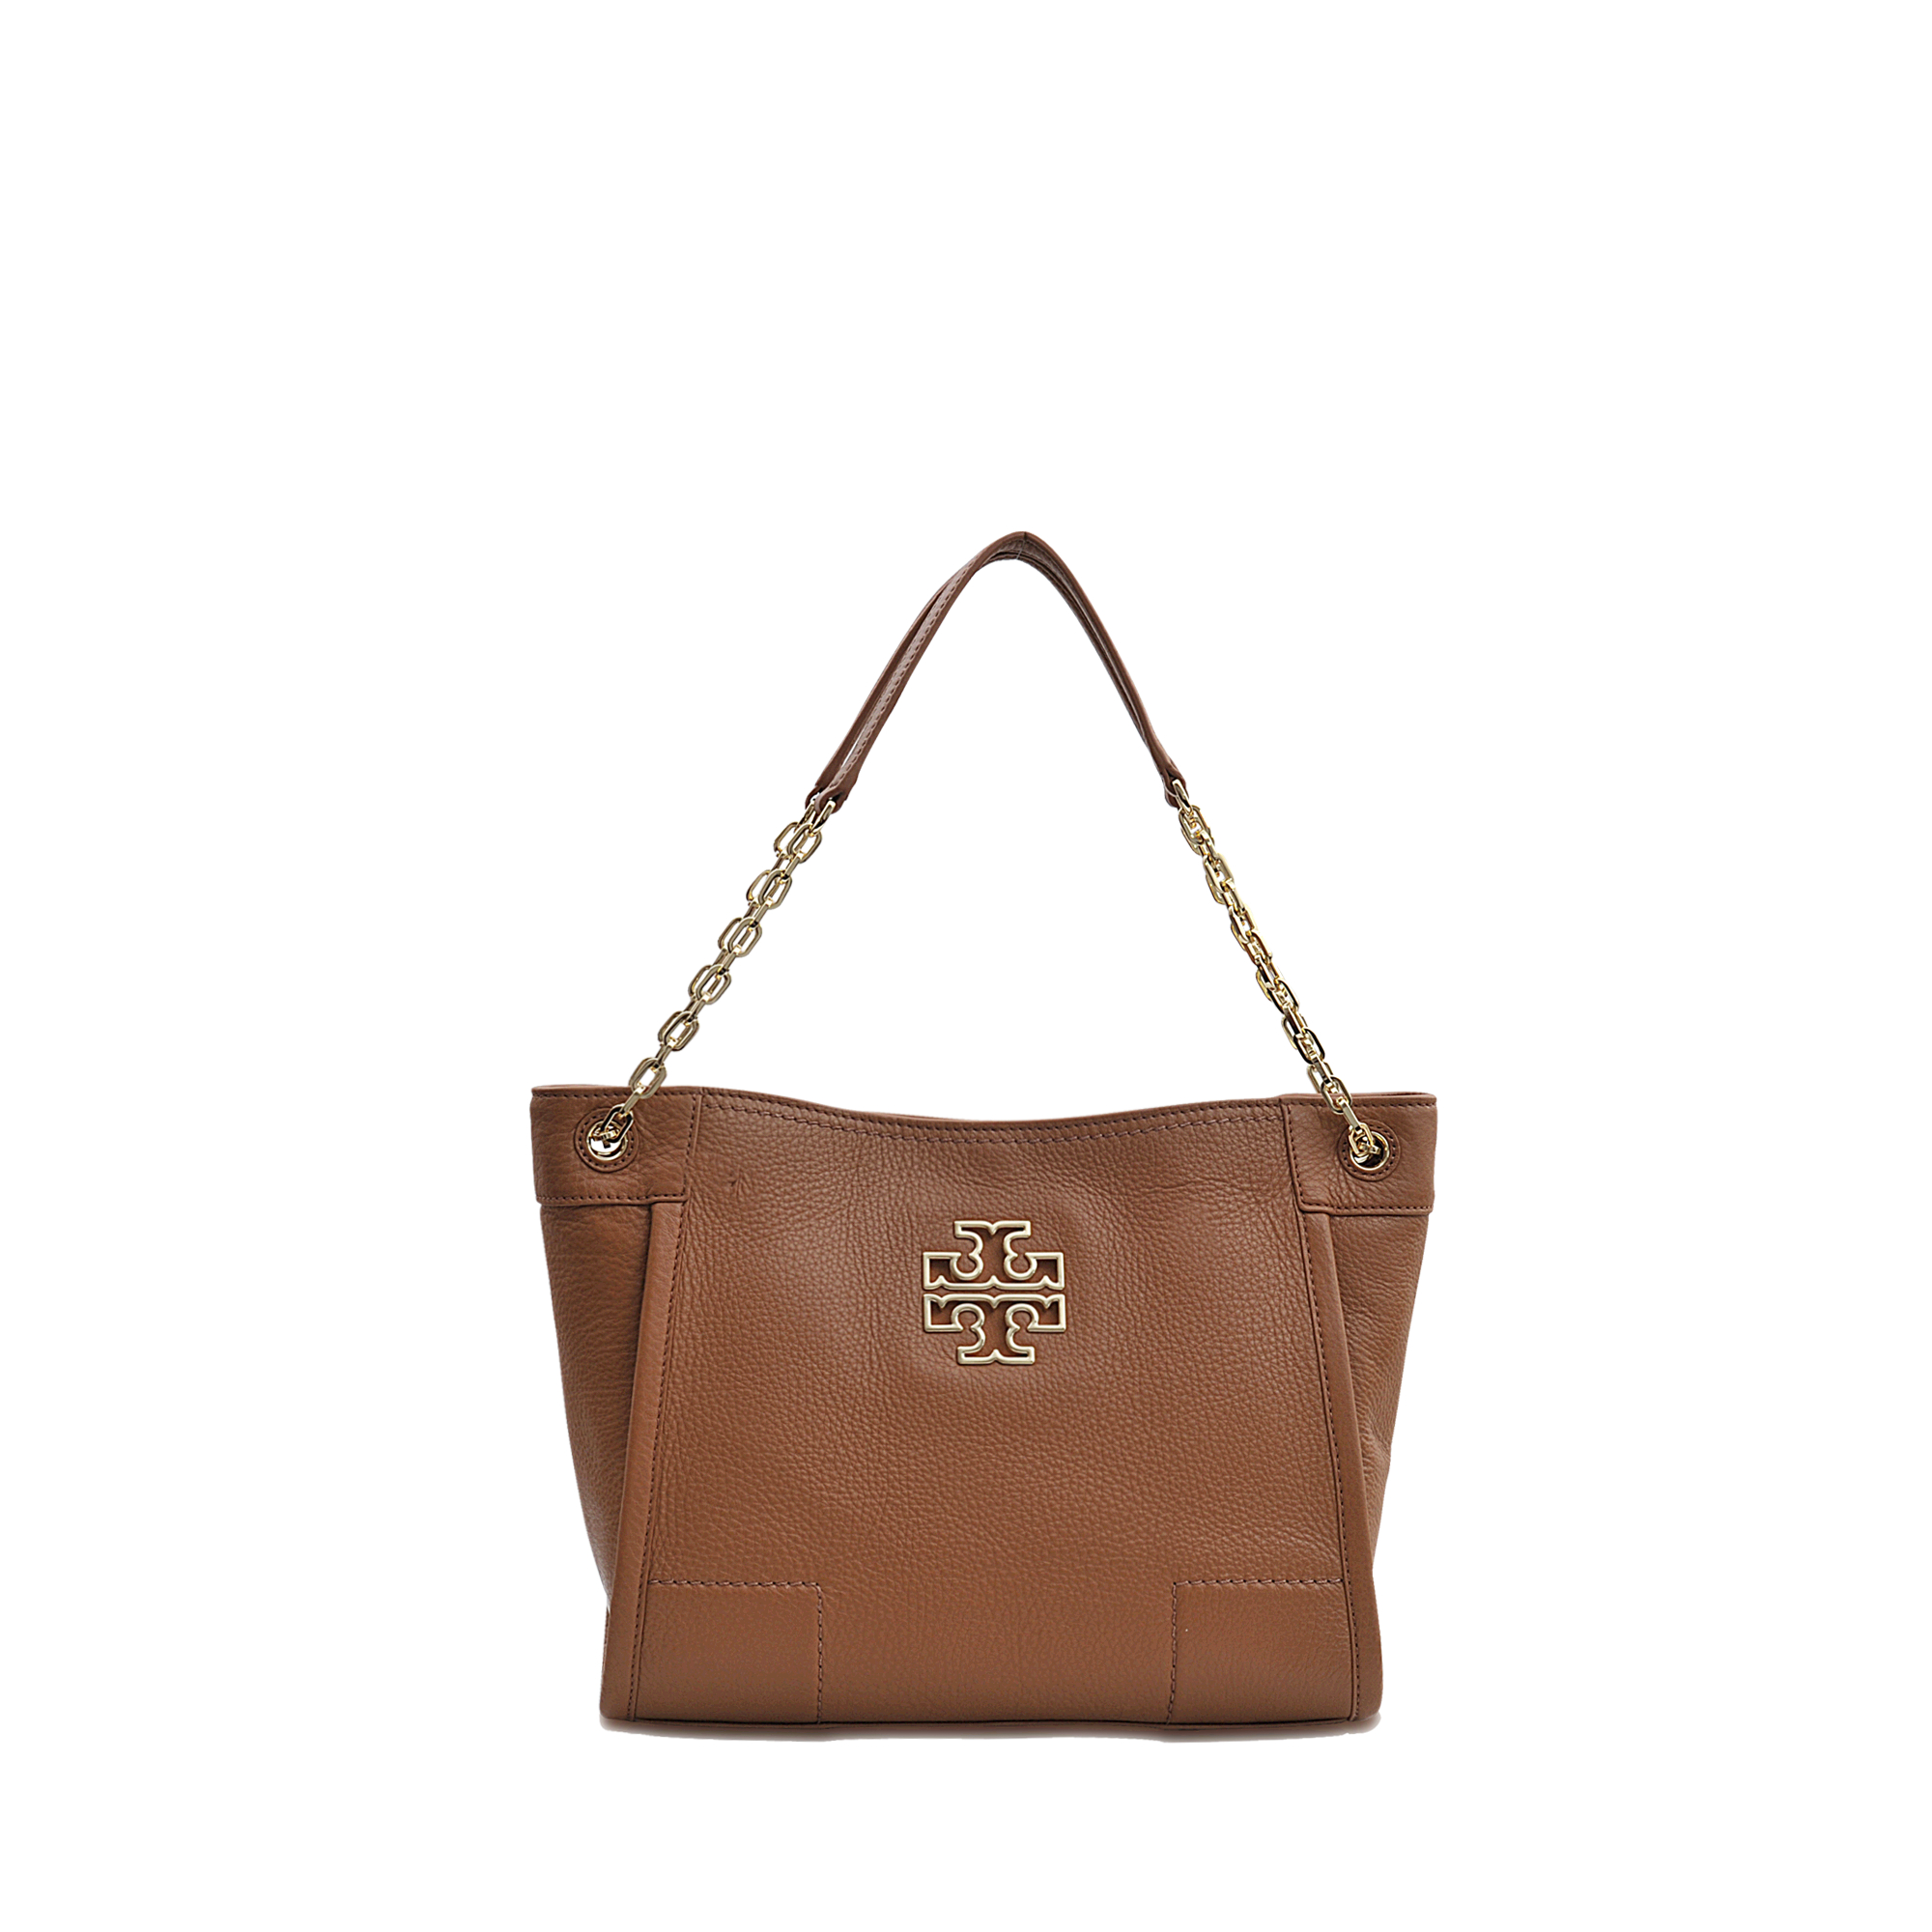 Tory Burch Britten Small Slouchy Tote in Brown | Lyst